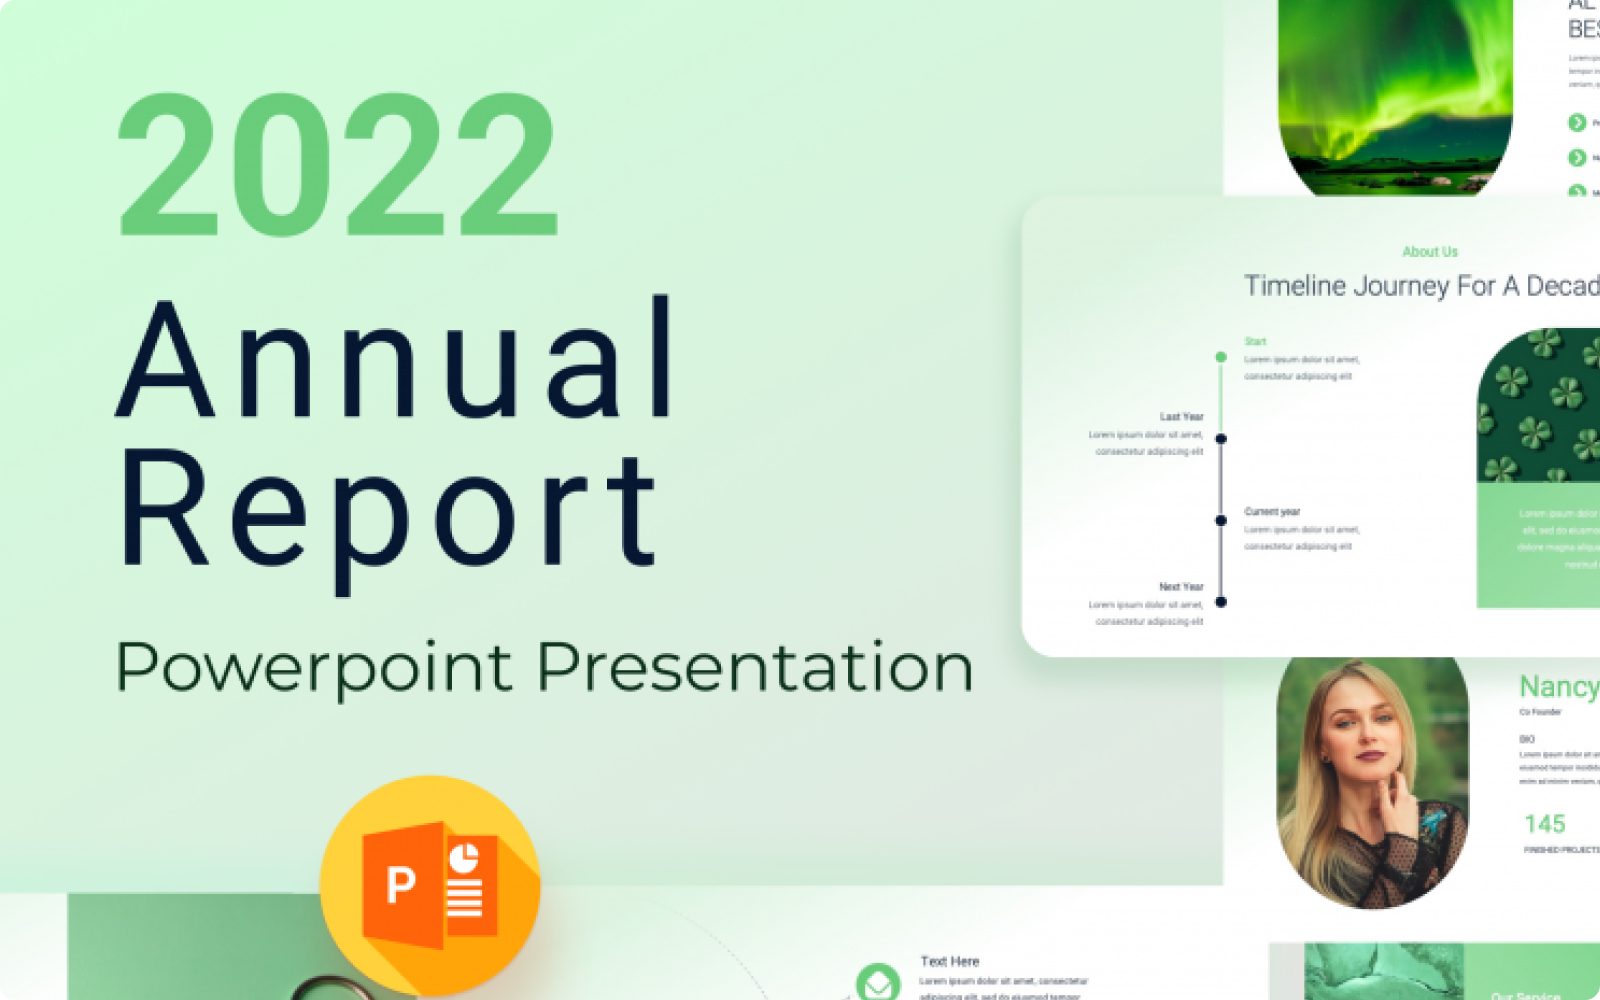 2022 Annual Report PowerPoint Presentation Template